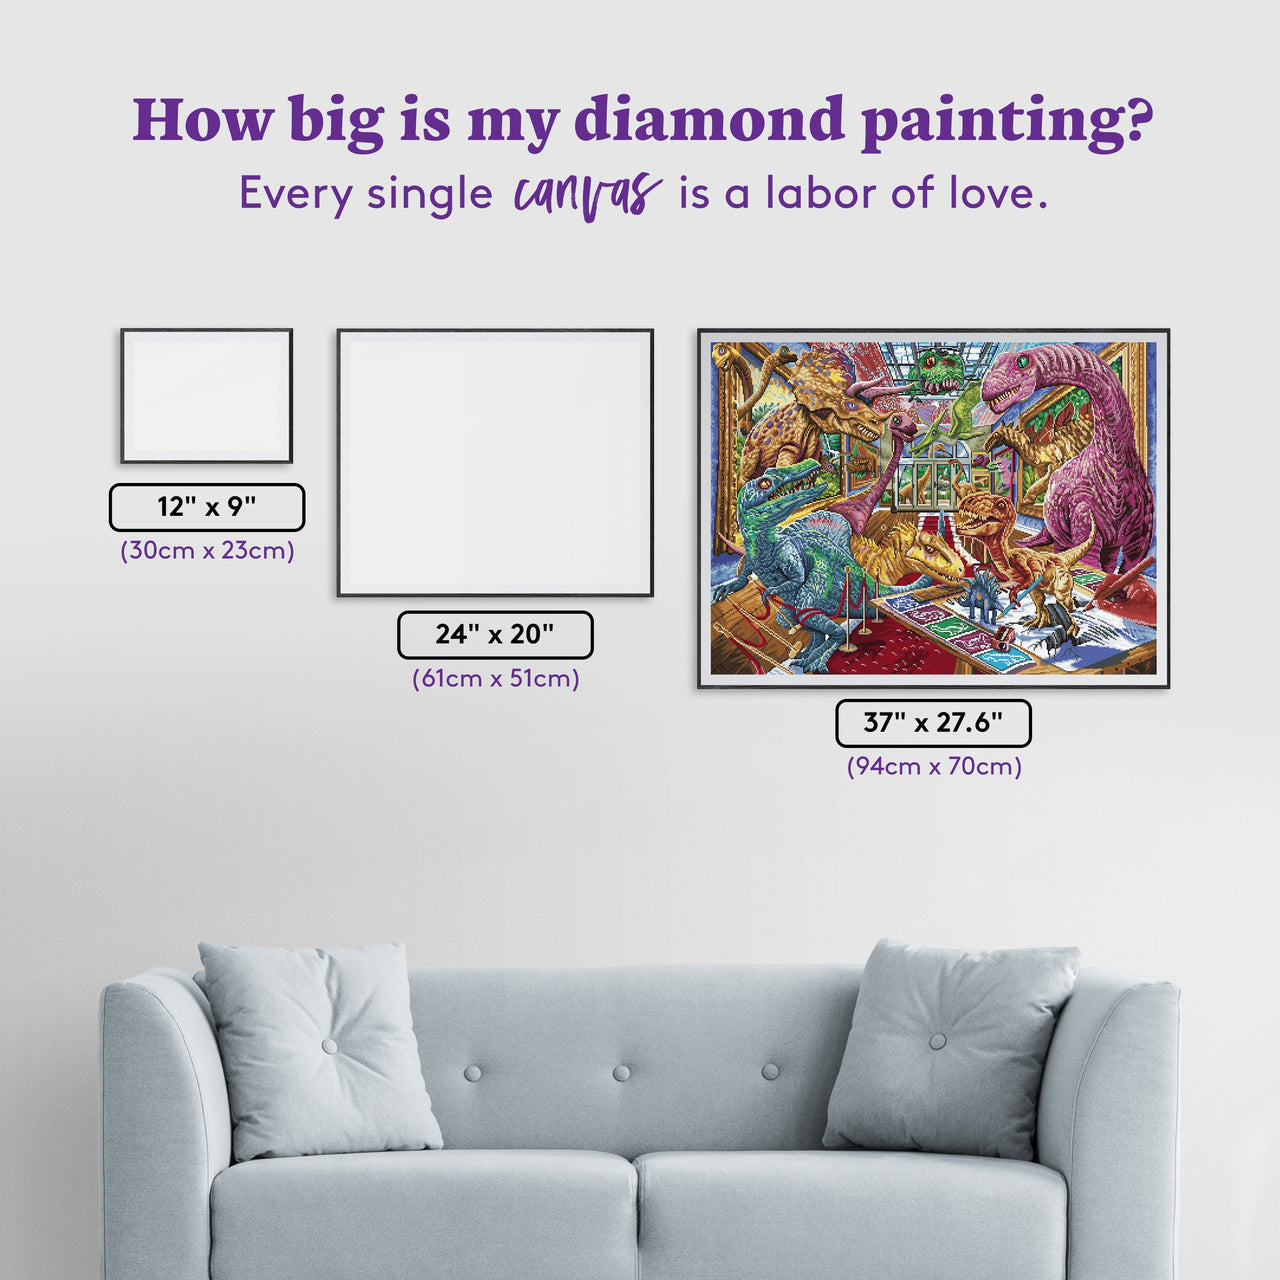 Diamond Painting Dino Mania 37" x 27.6" (94cm x 70cm) / Square with 59 Colors including 4 ABs and 3 Fairy Dust Diamond / 105,937